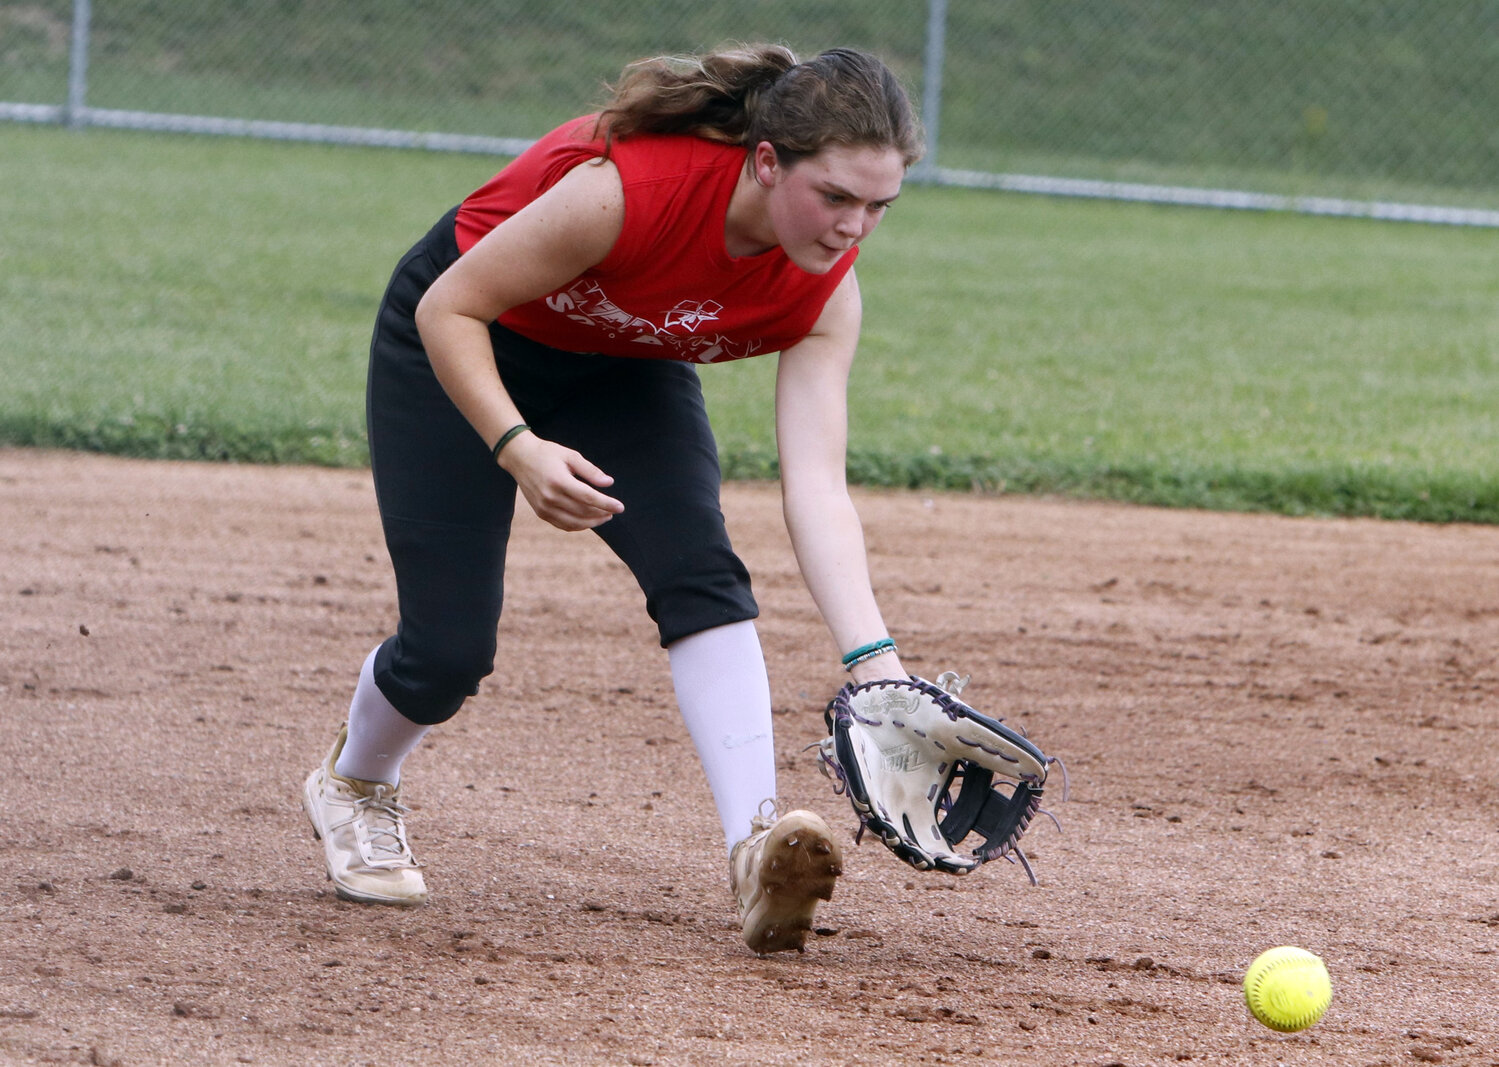 Paige Campbell fields a ground ball during infield drills at a practice earlier this month.